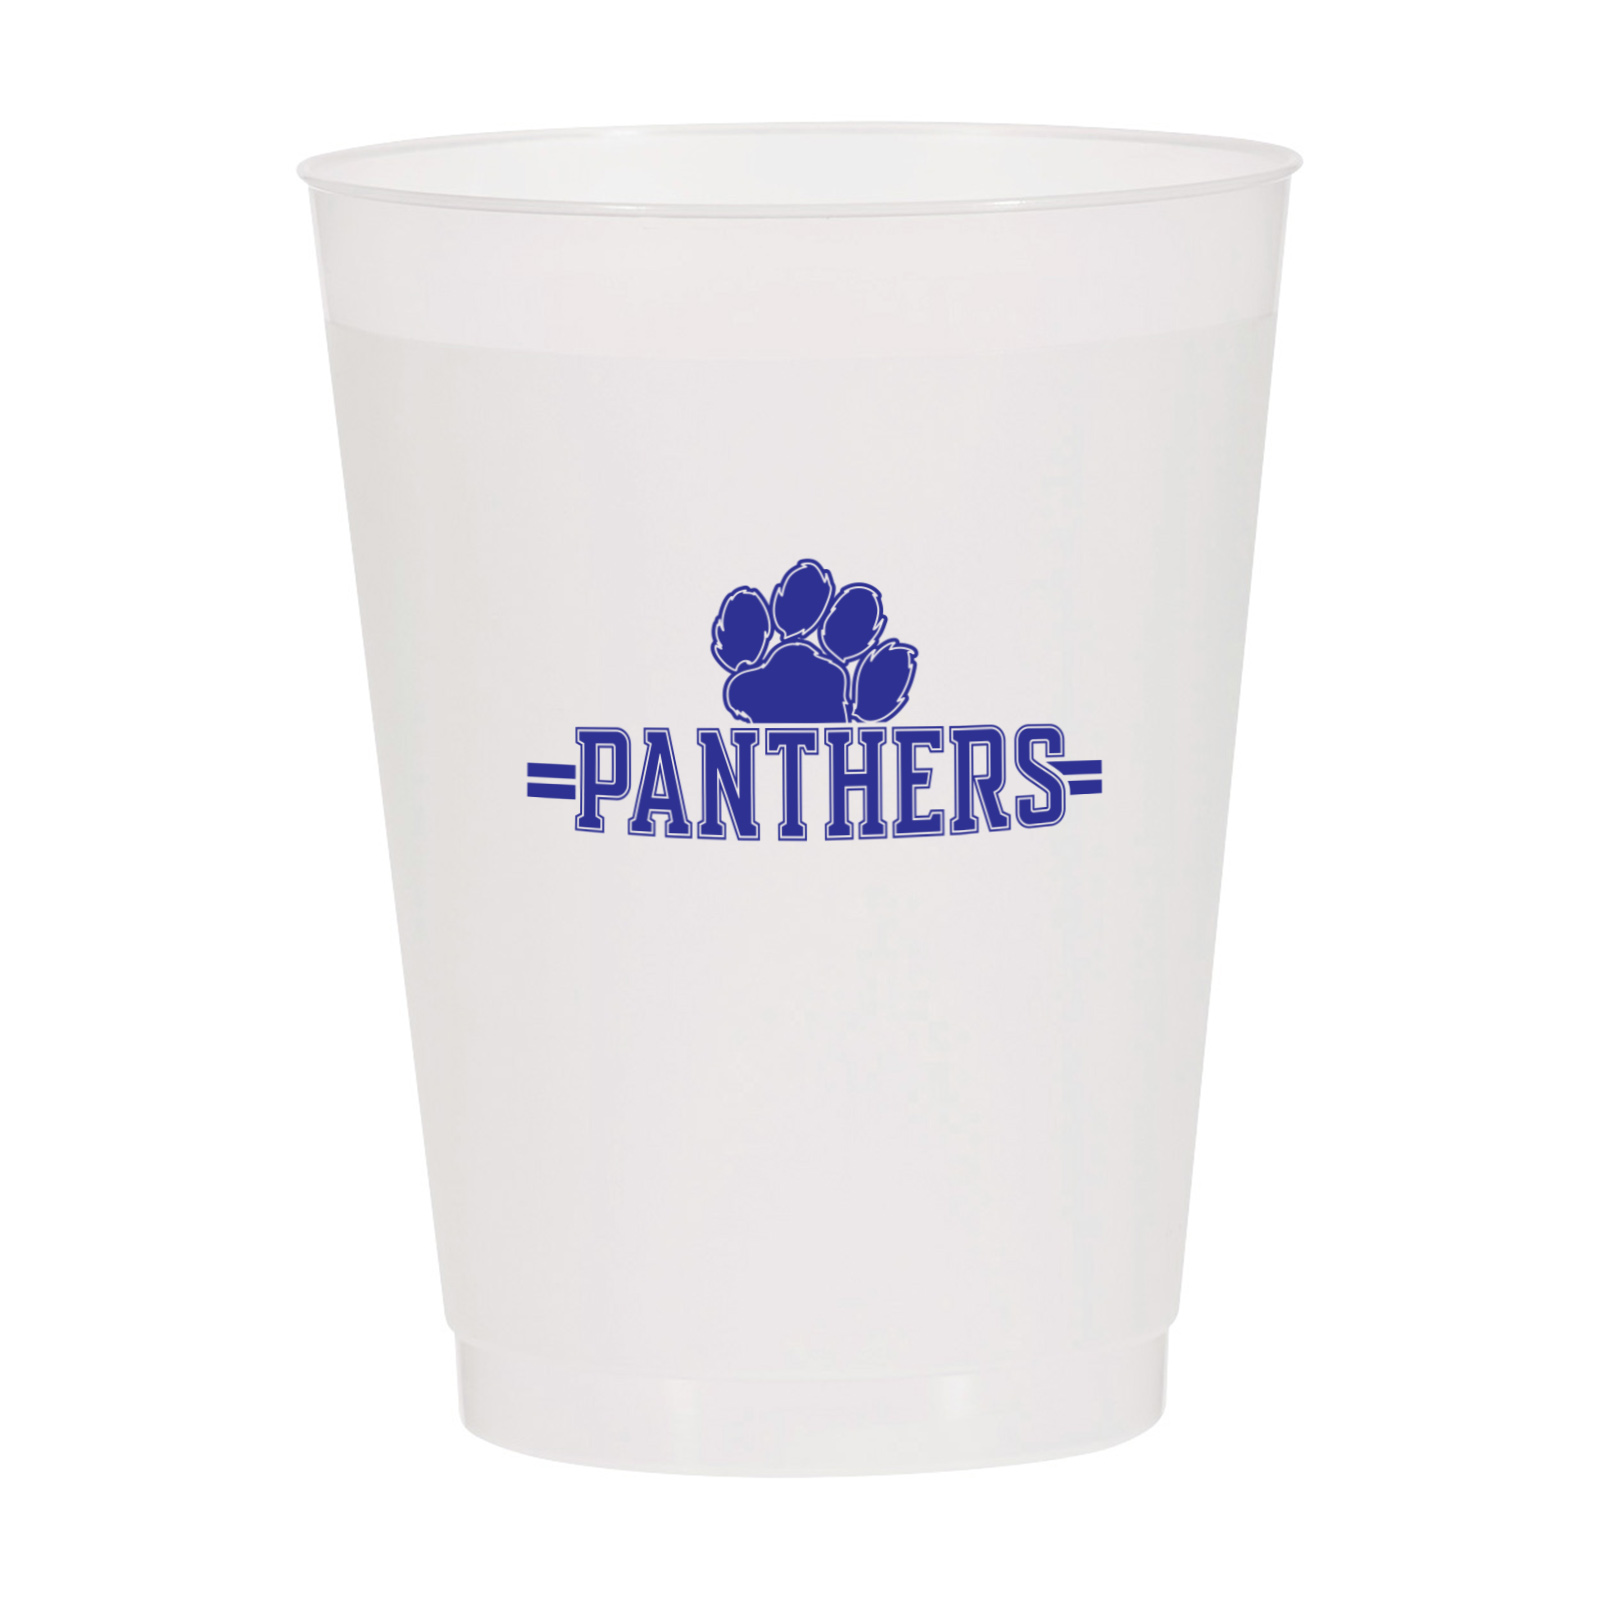 16 oz. Frosted Reusable Stadium Cup 